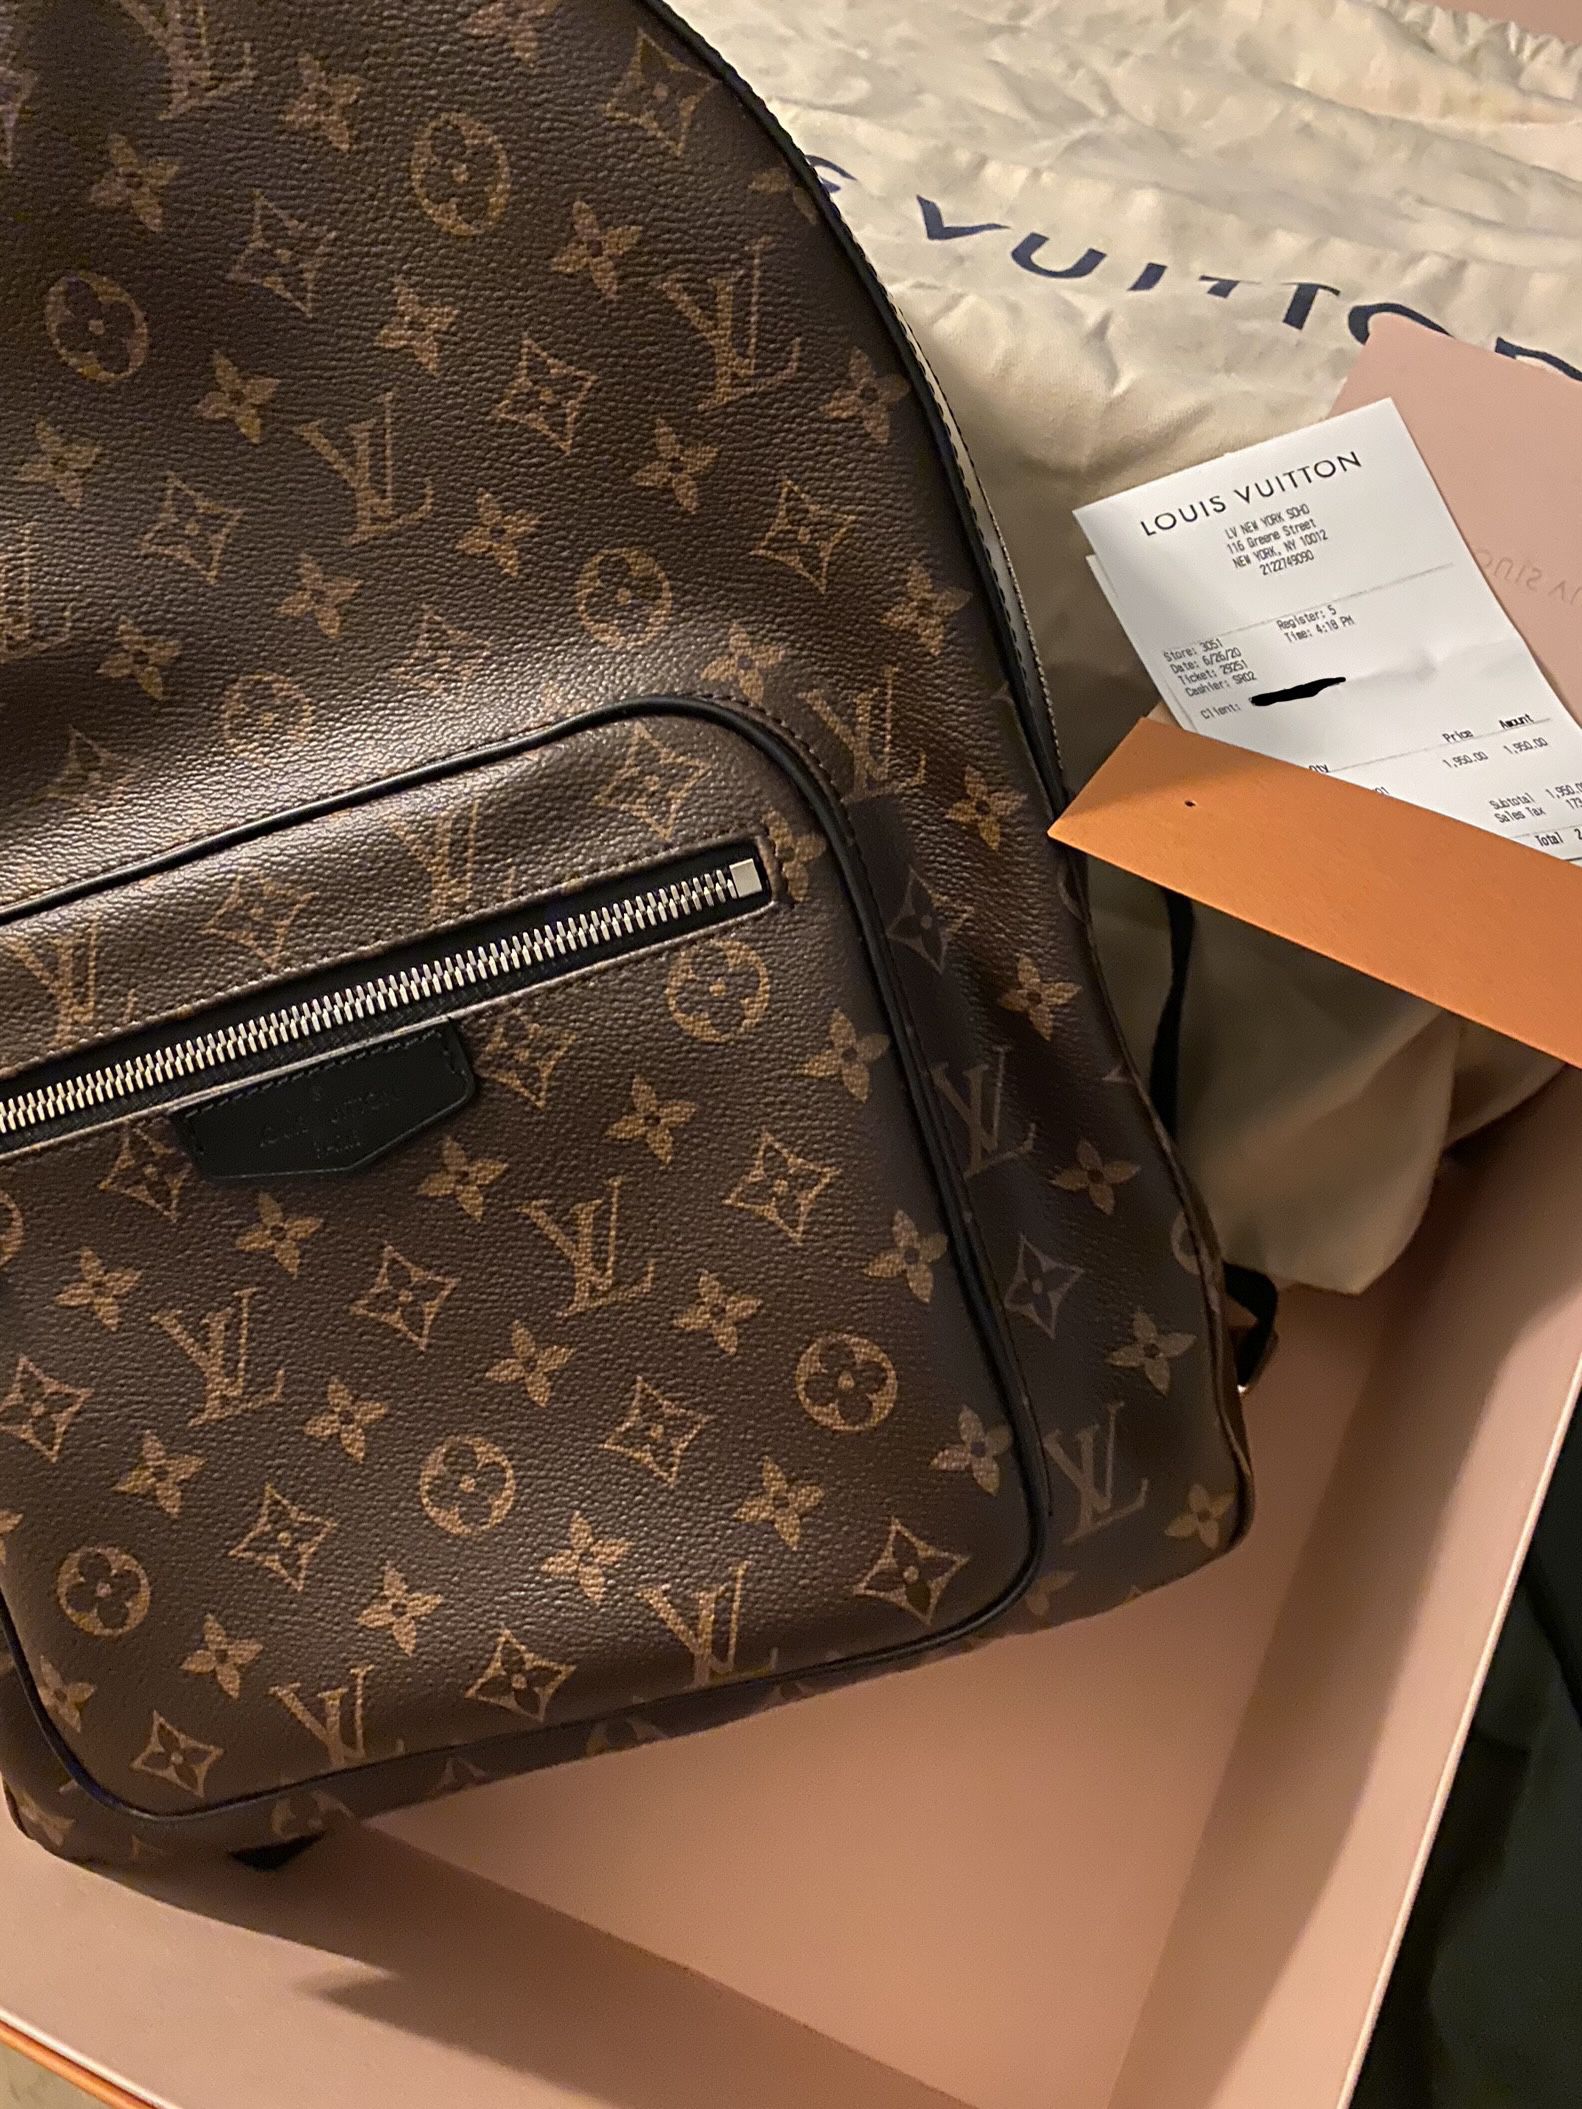 Louis Vuitton toiletry pouch pm for Sale in New York, NY - OfferUp